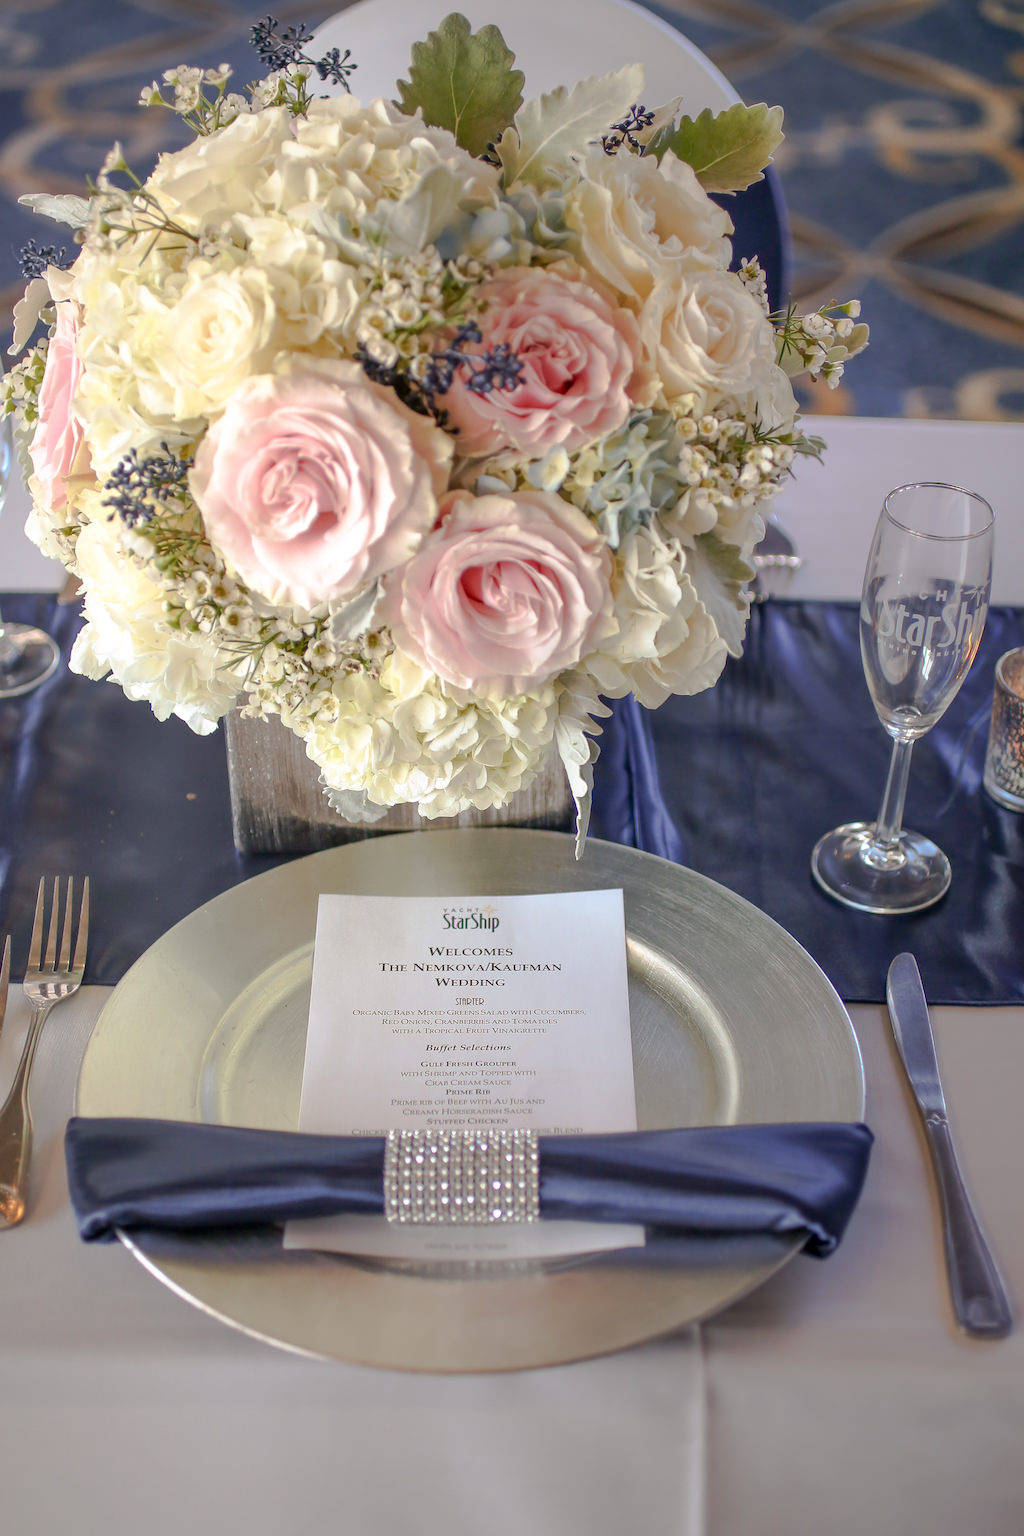 Nautical Wedding Reception Table Setting with Blush Pink and White Roses, Blue Berries and Greenery Low Centerpiece in Wooden Box, with Silver Charger, Navy Blue Linens and Satin Runner, Rhinestone Napkin Ring and Silver Charger | Tampa Bay Wedding Venue Yacht Starship